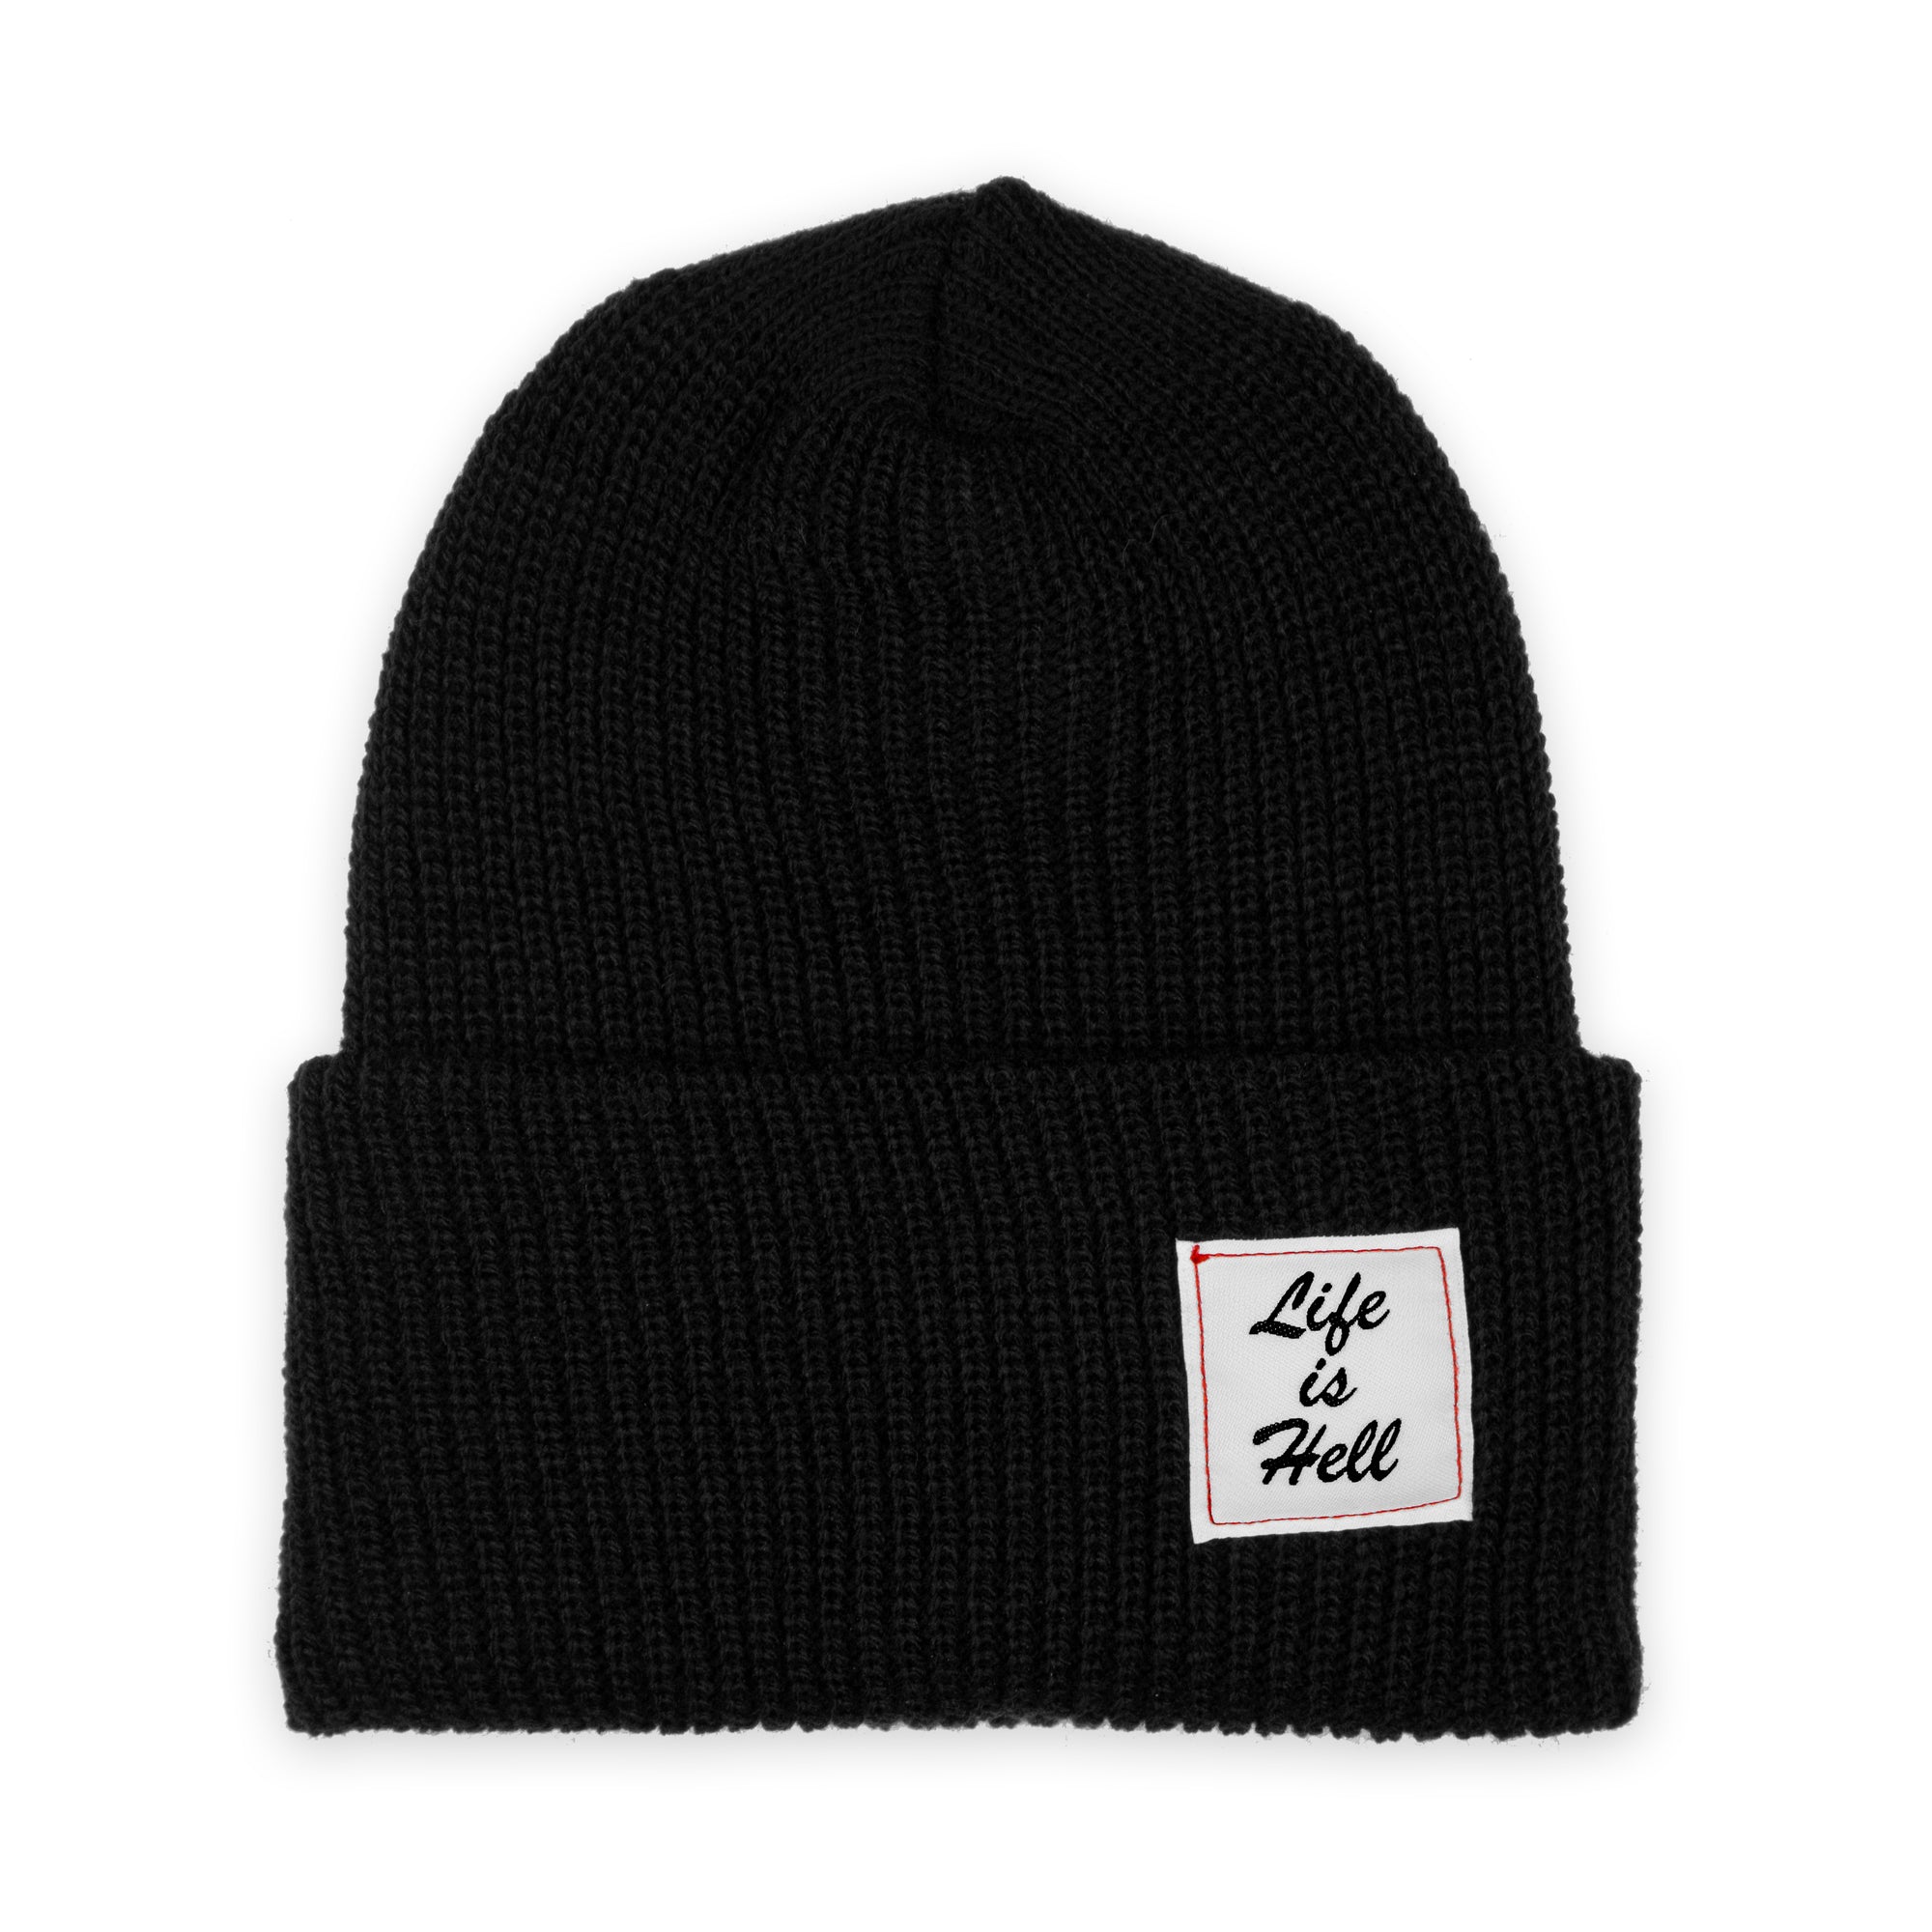 Photo of the "Life is Hell" Beanie by No Fun®.  Product is photographed against a white background.  Beanie is black, and features a small white woven label on the cuff that reads "Life Is Hell".  Label is white, with black text, and red contrasting stitching.